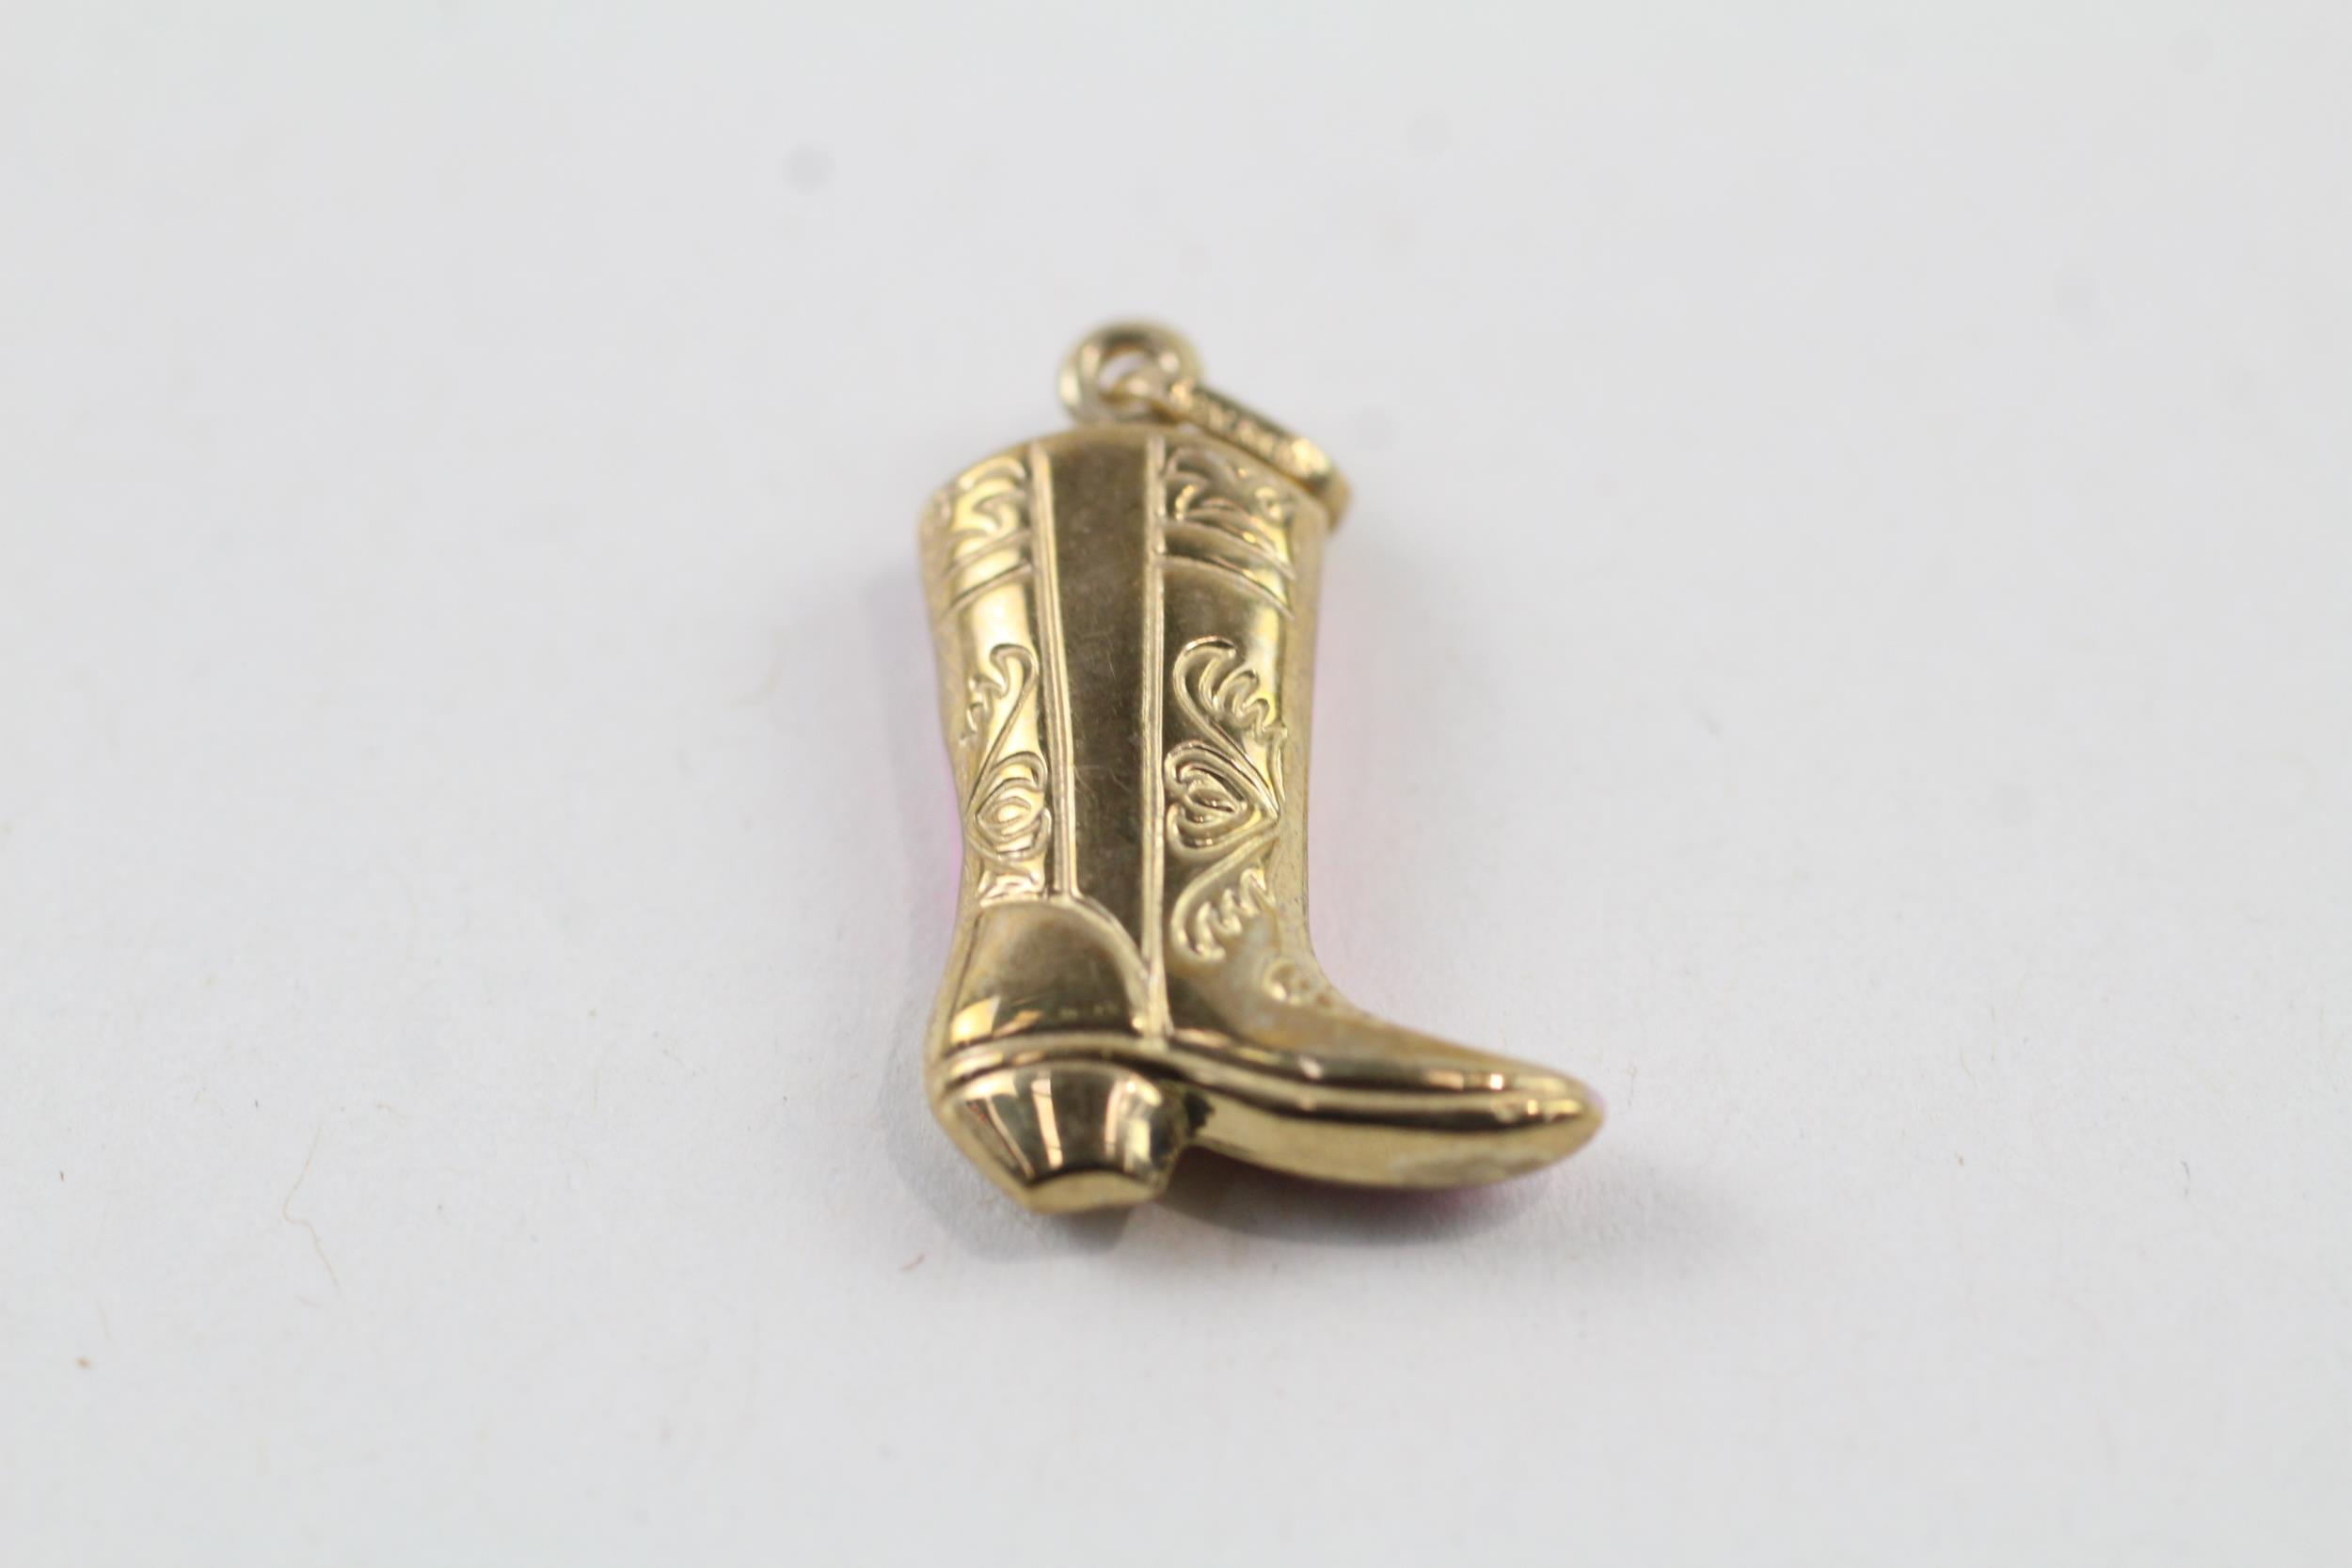 9ct gold pink enamel engraved patterned cowboy boot charm (0.7g) - Image 2 of 4